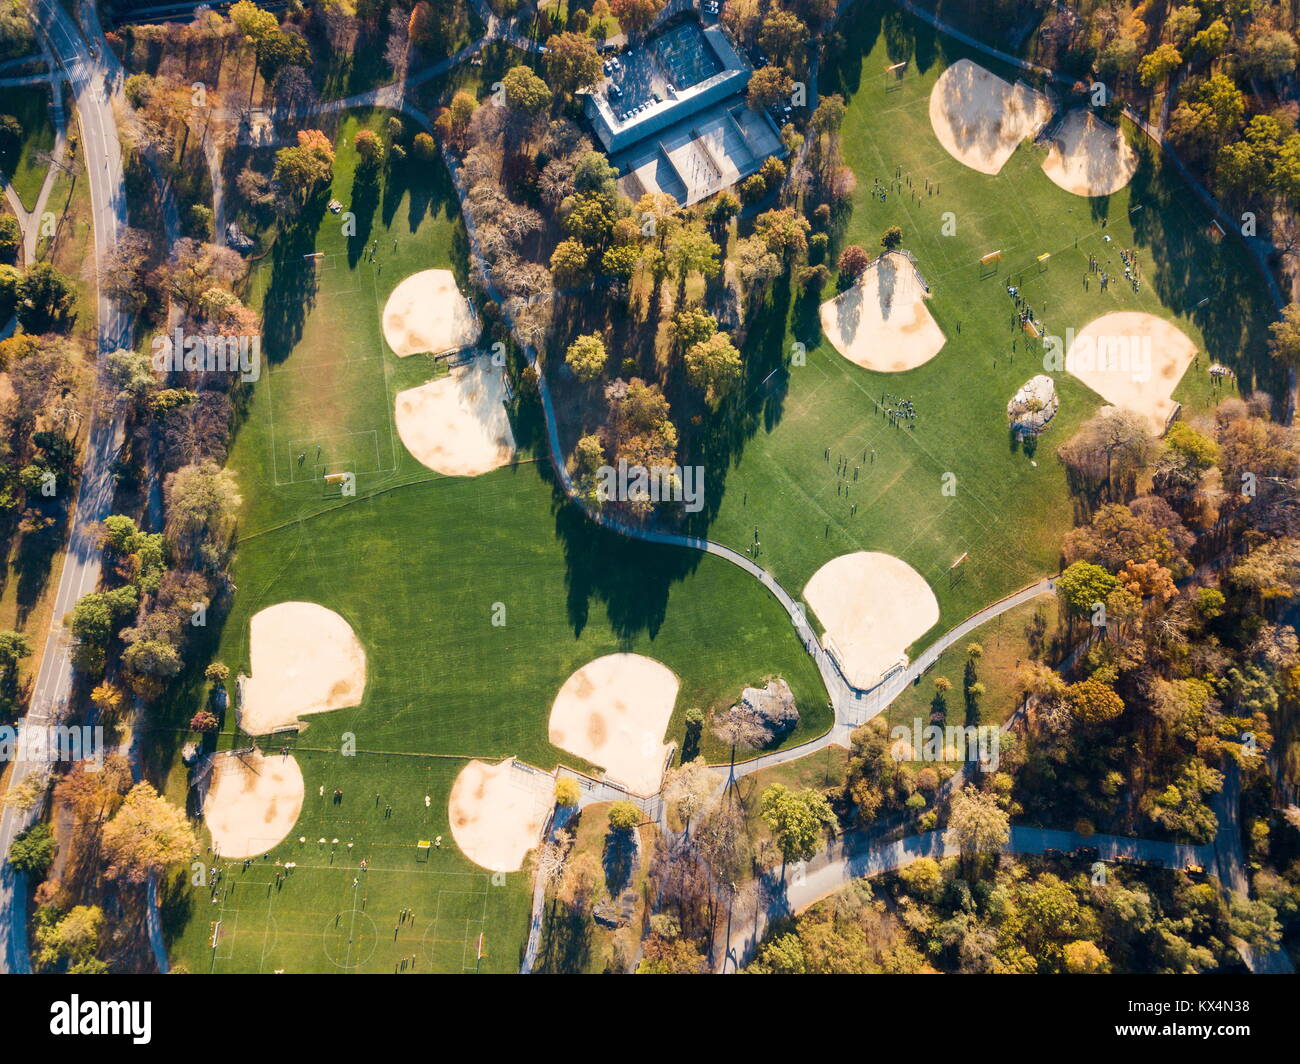 Soccer and baseball playgrounds in Central park aerial view Stock Photo